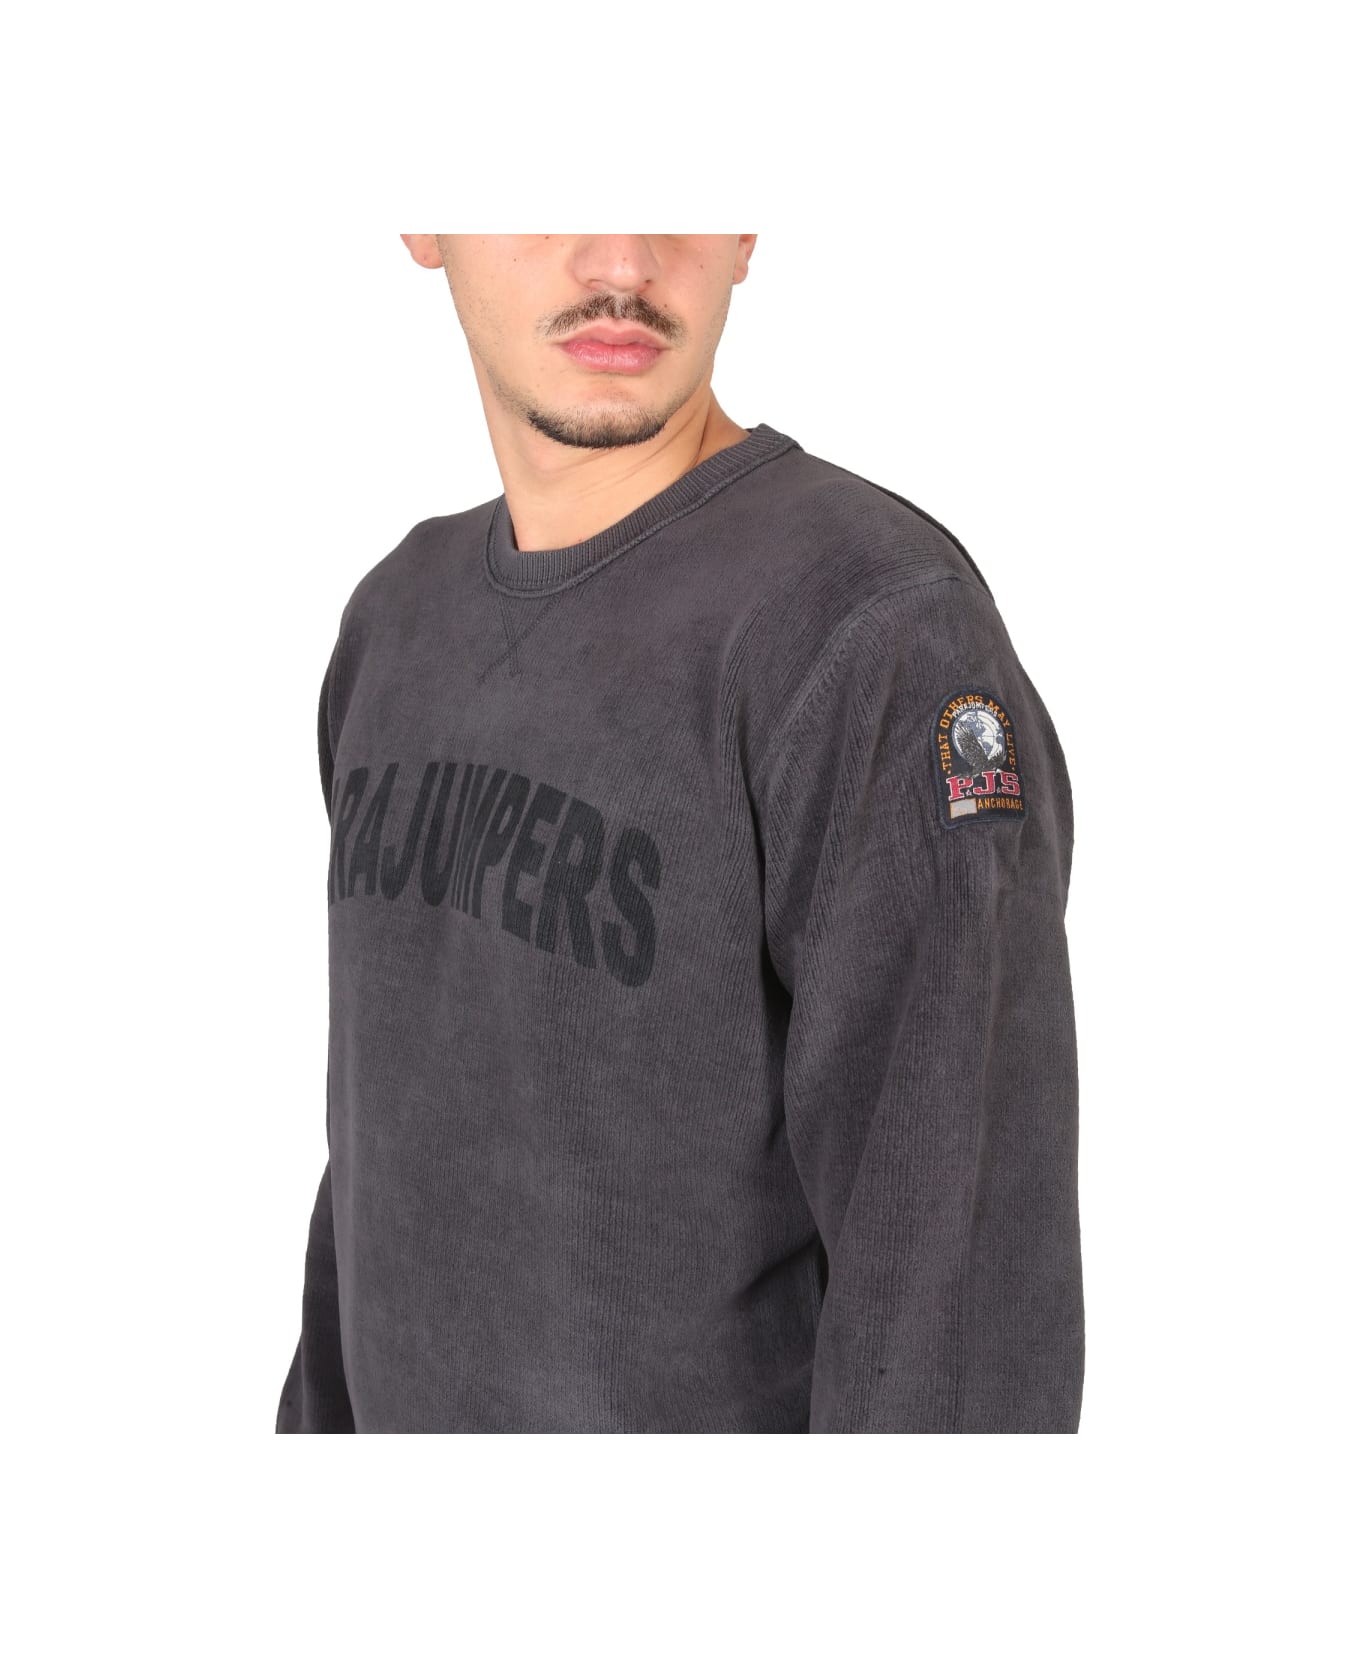 Parajumpers Sweatshirt With Logo - CHARCOAL フリース